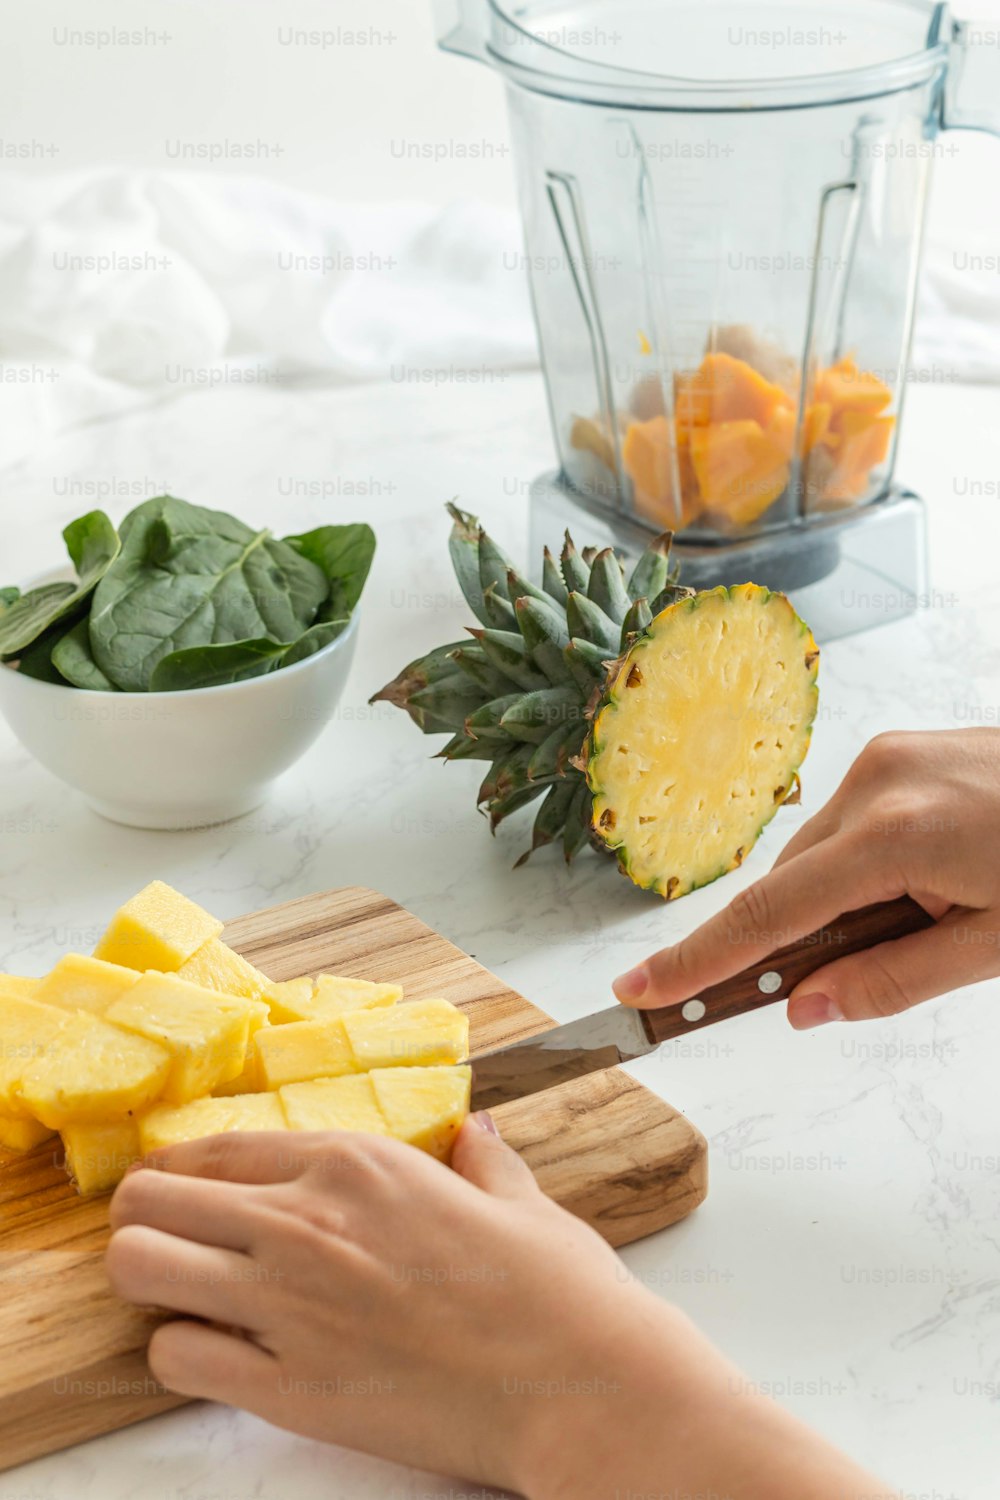 a person cutting up a pineapple on a cutting board